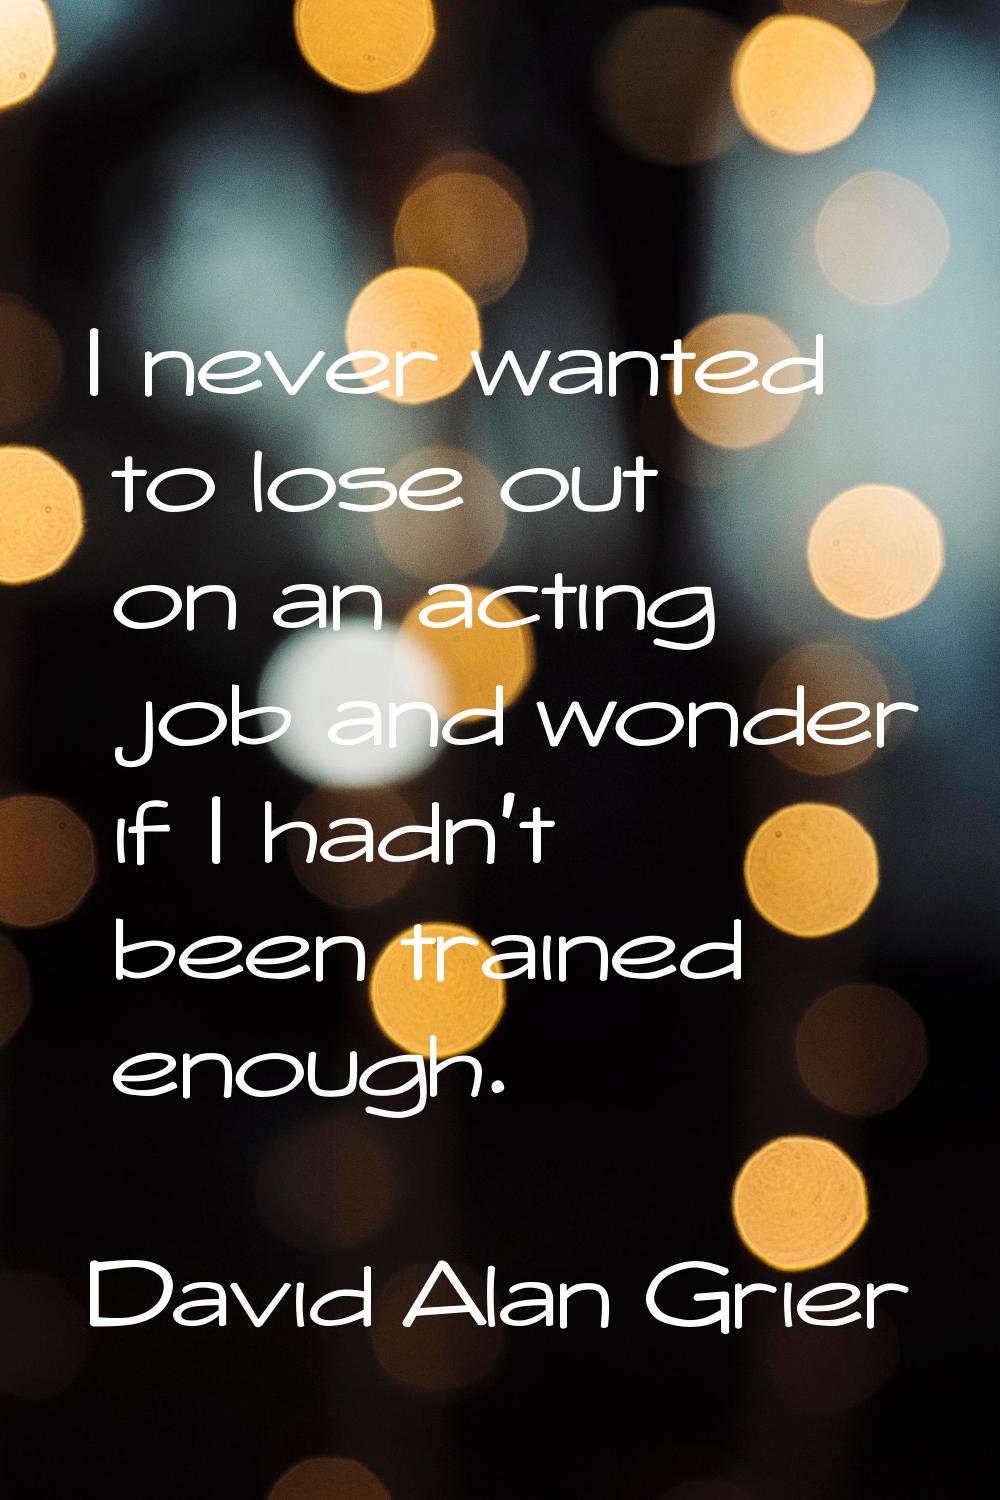 I never wanted to lose out on an acting job and wonder if I hadn't been trained enough.